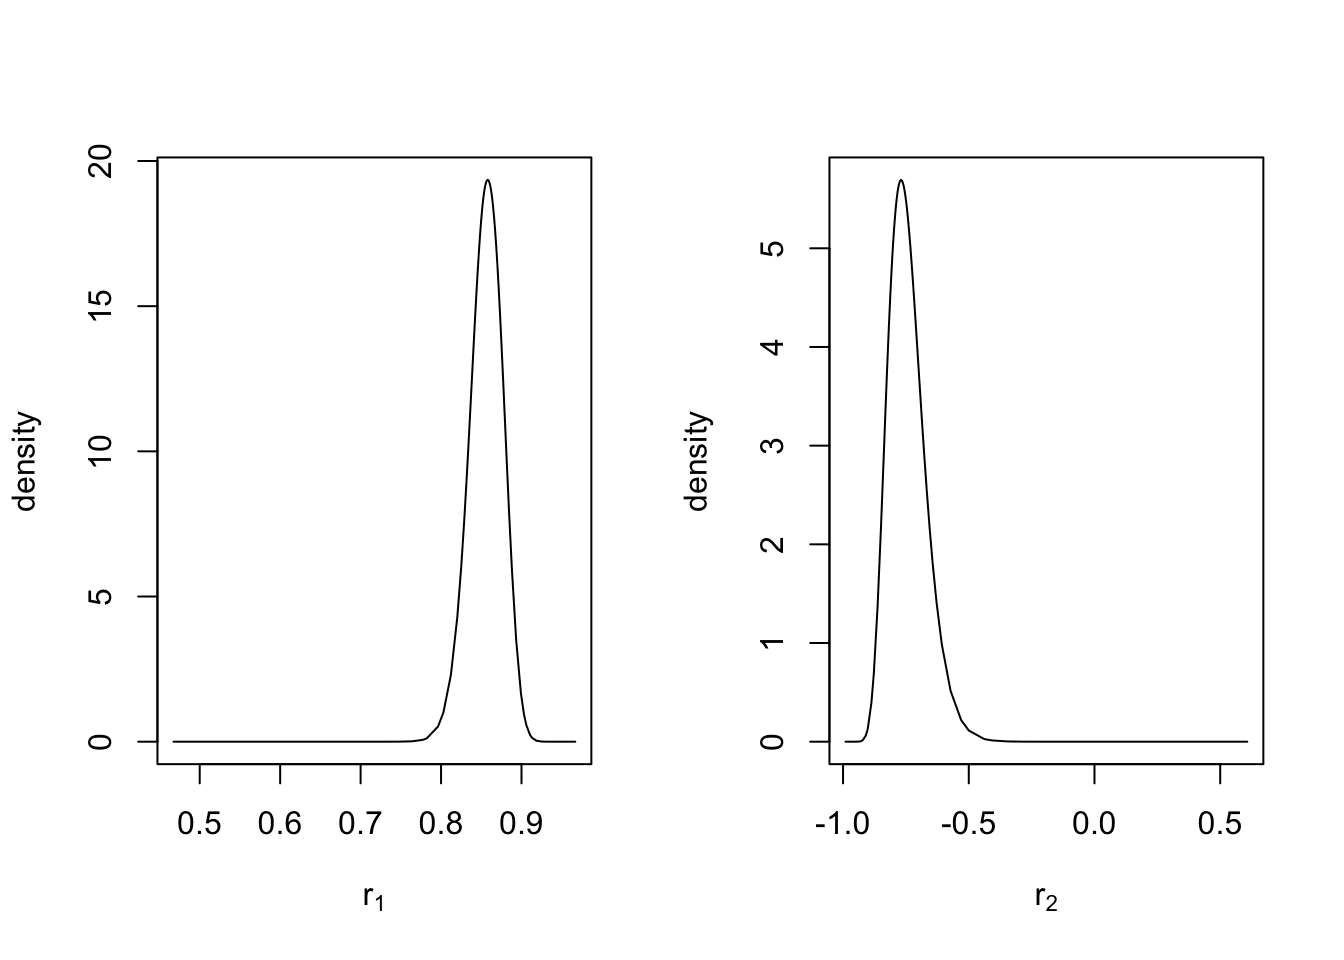 Marginal posterior densities of PACF(1) and PACF(2) in the internal `R-INLA` representation for an AR(2) with level plus noise model.